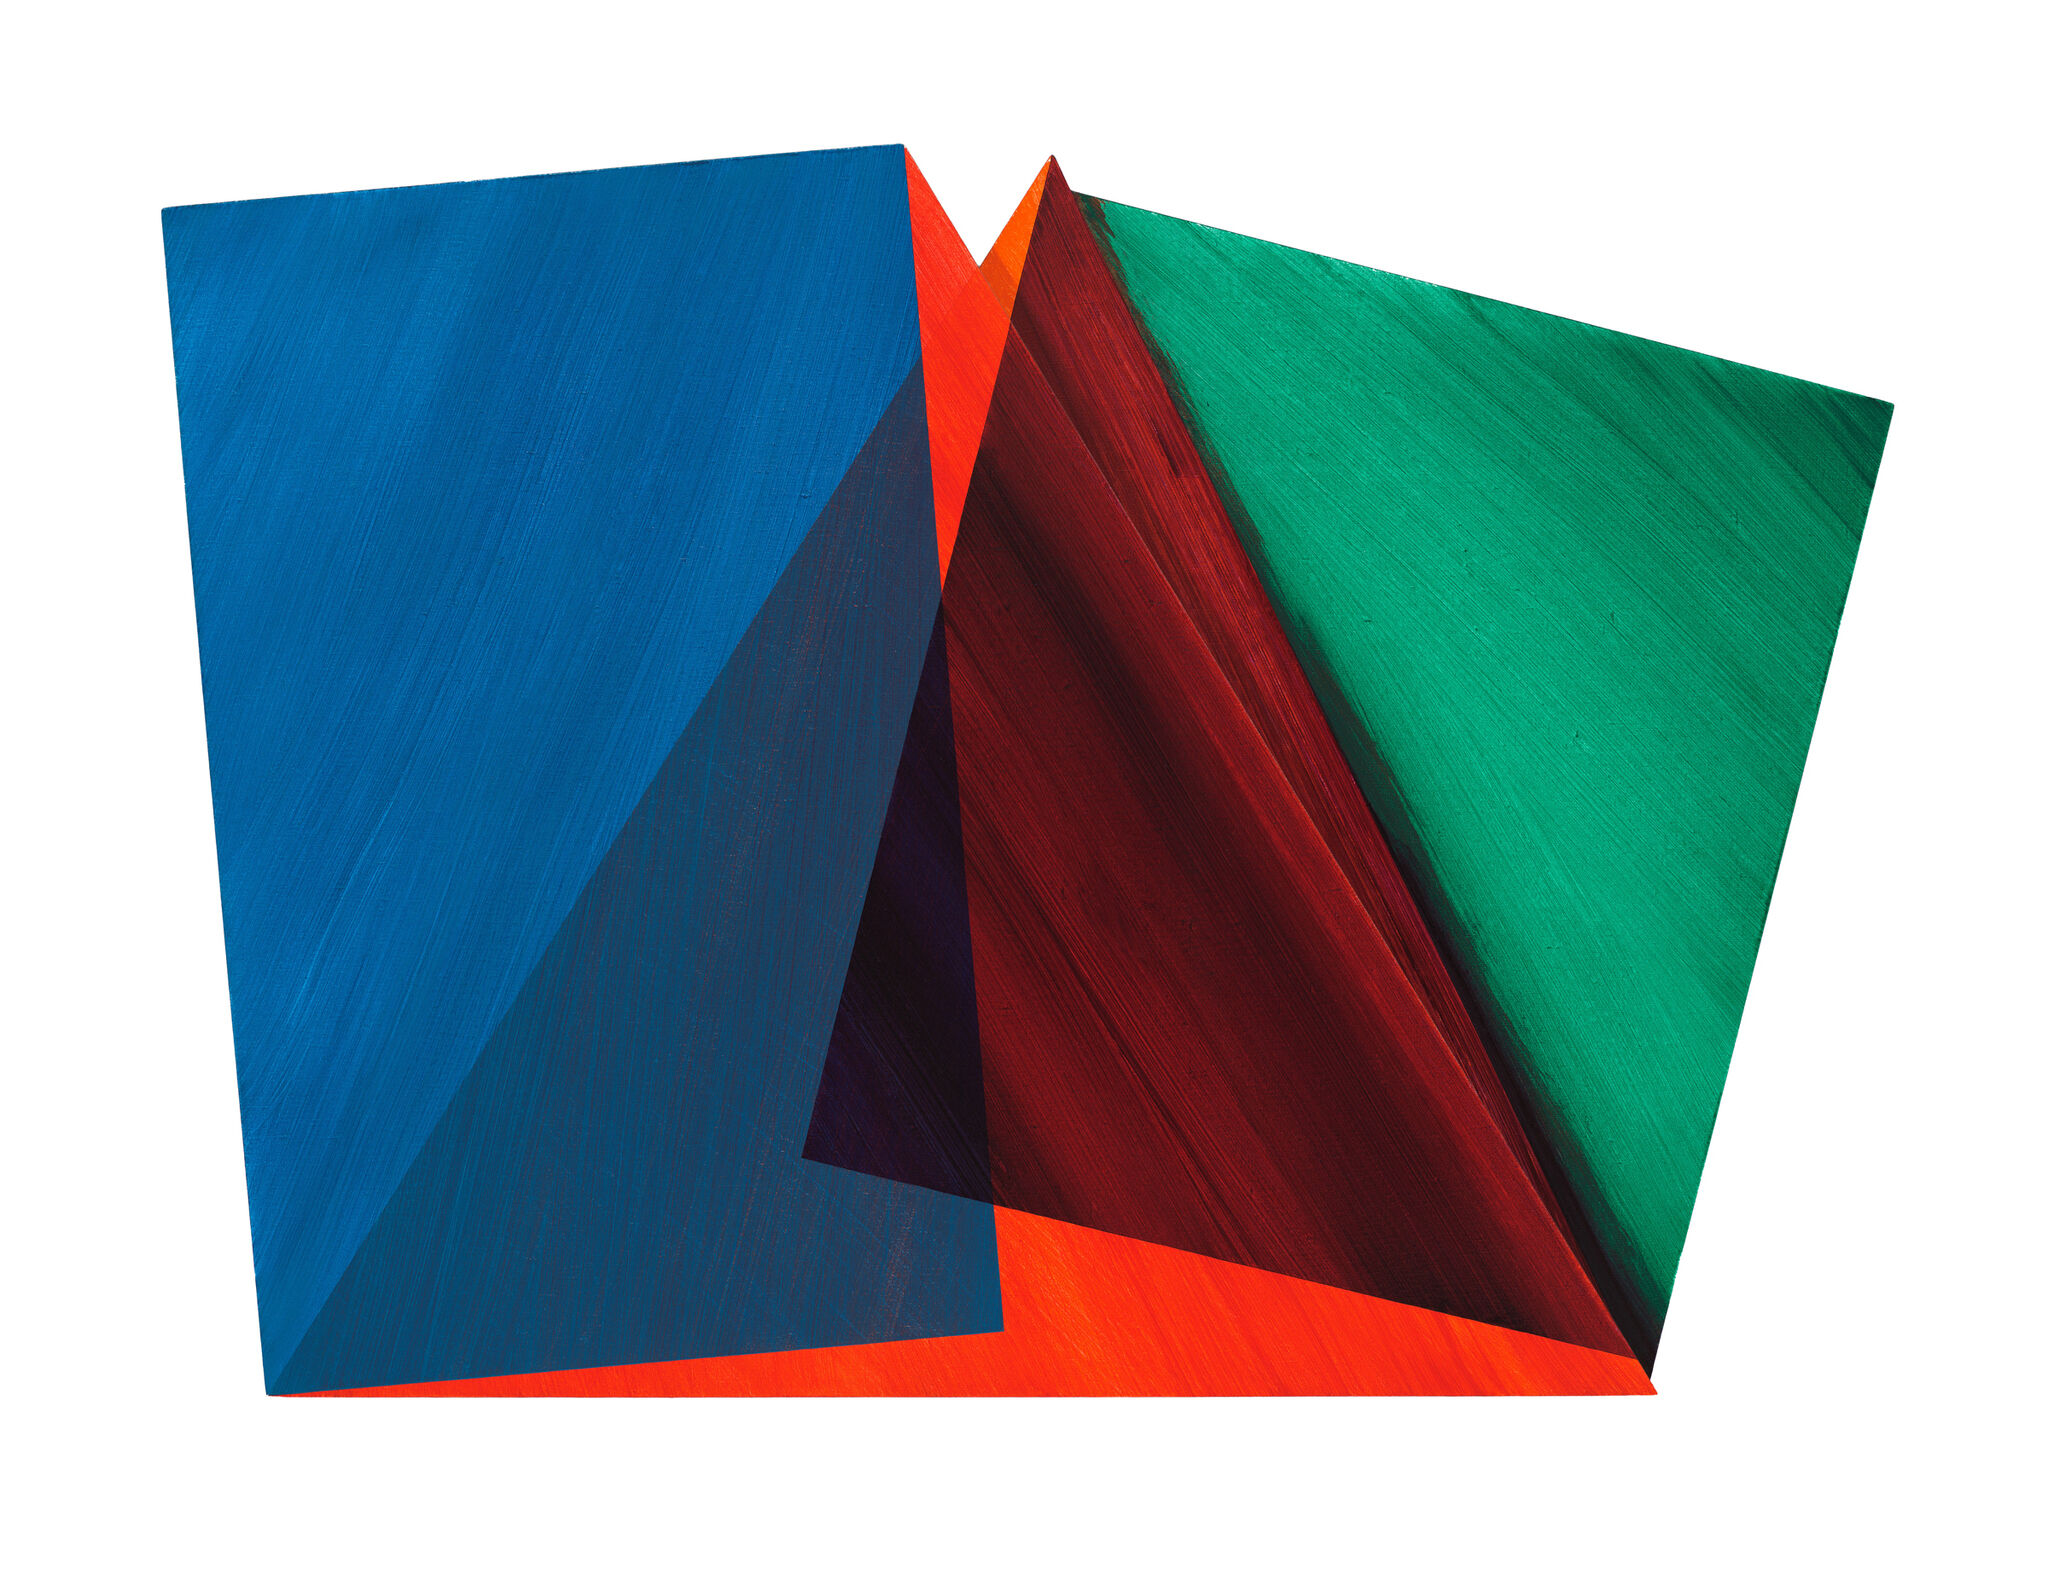 Overlapping and partially transparent shapes in green, red, and blue.